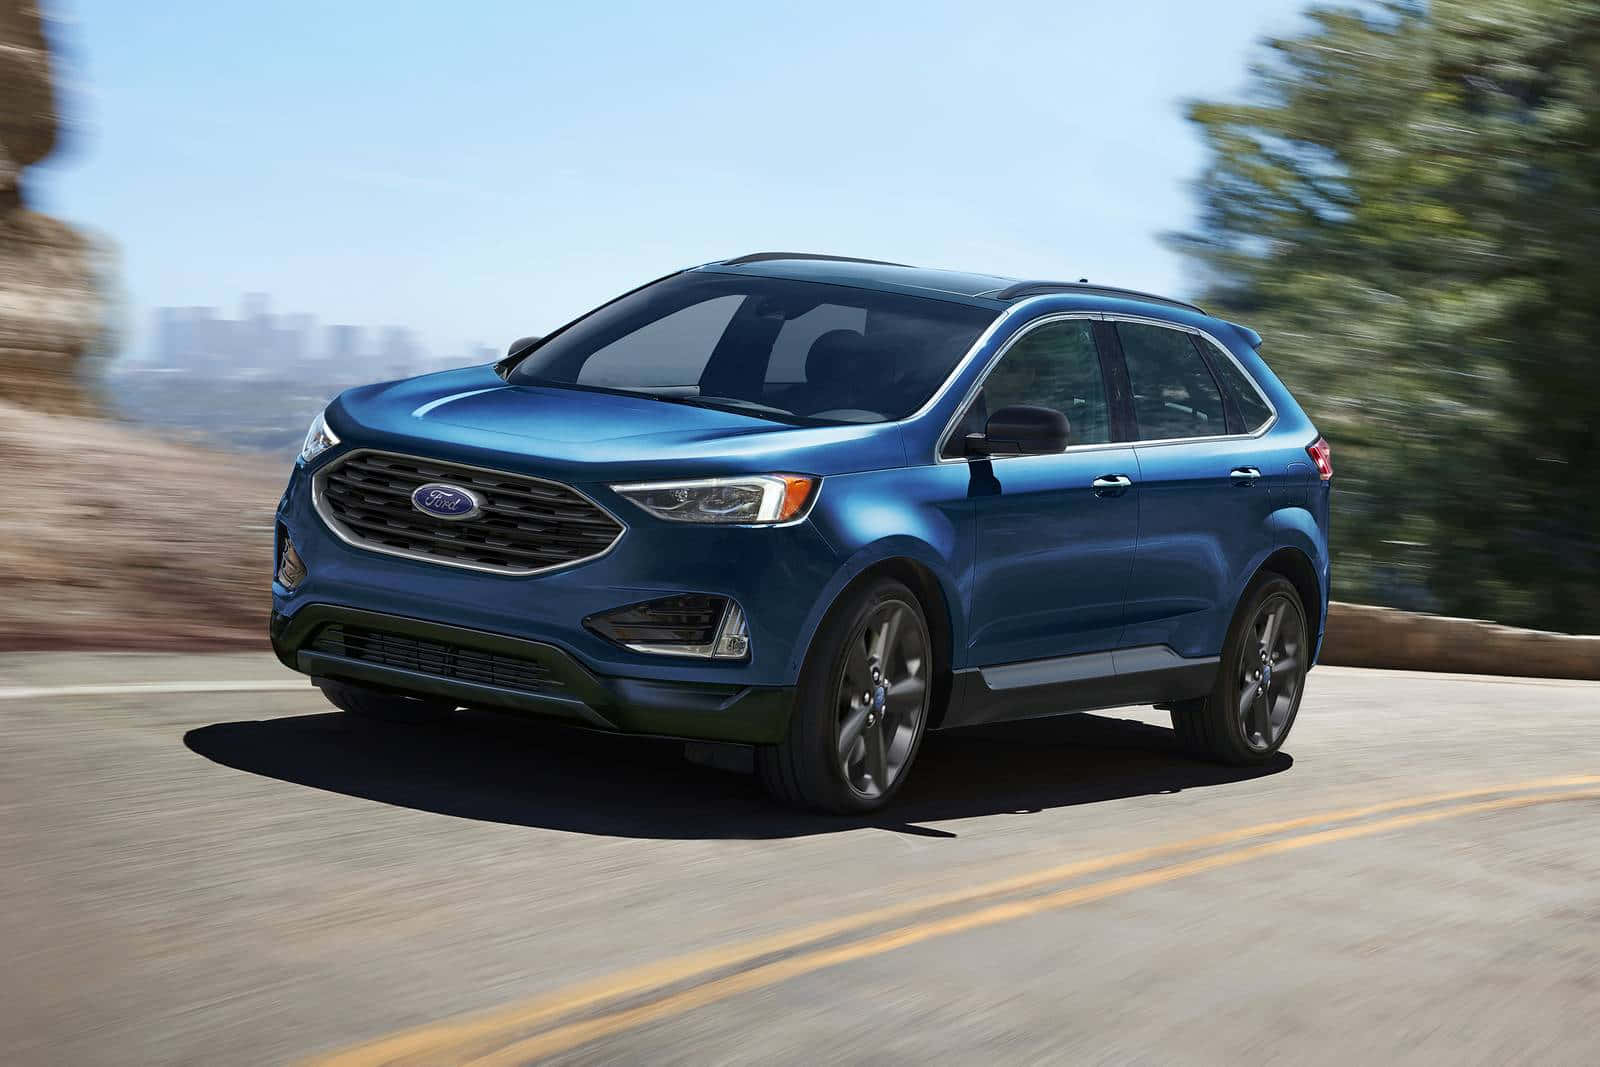 The 2020 Ford Edge Is Driving Down A Mountain Road